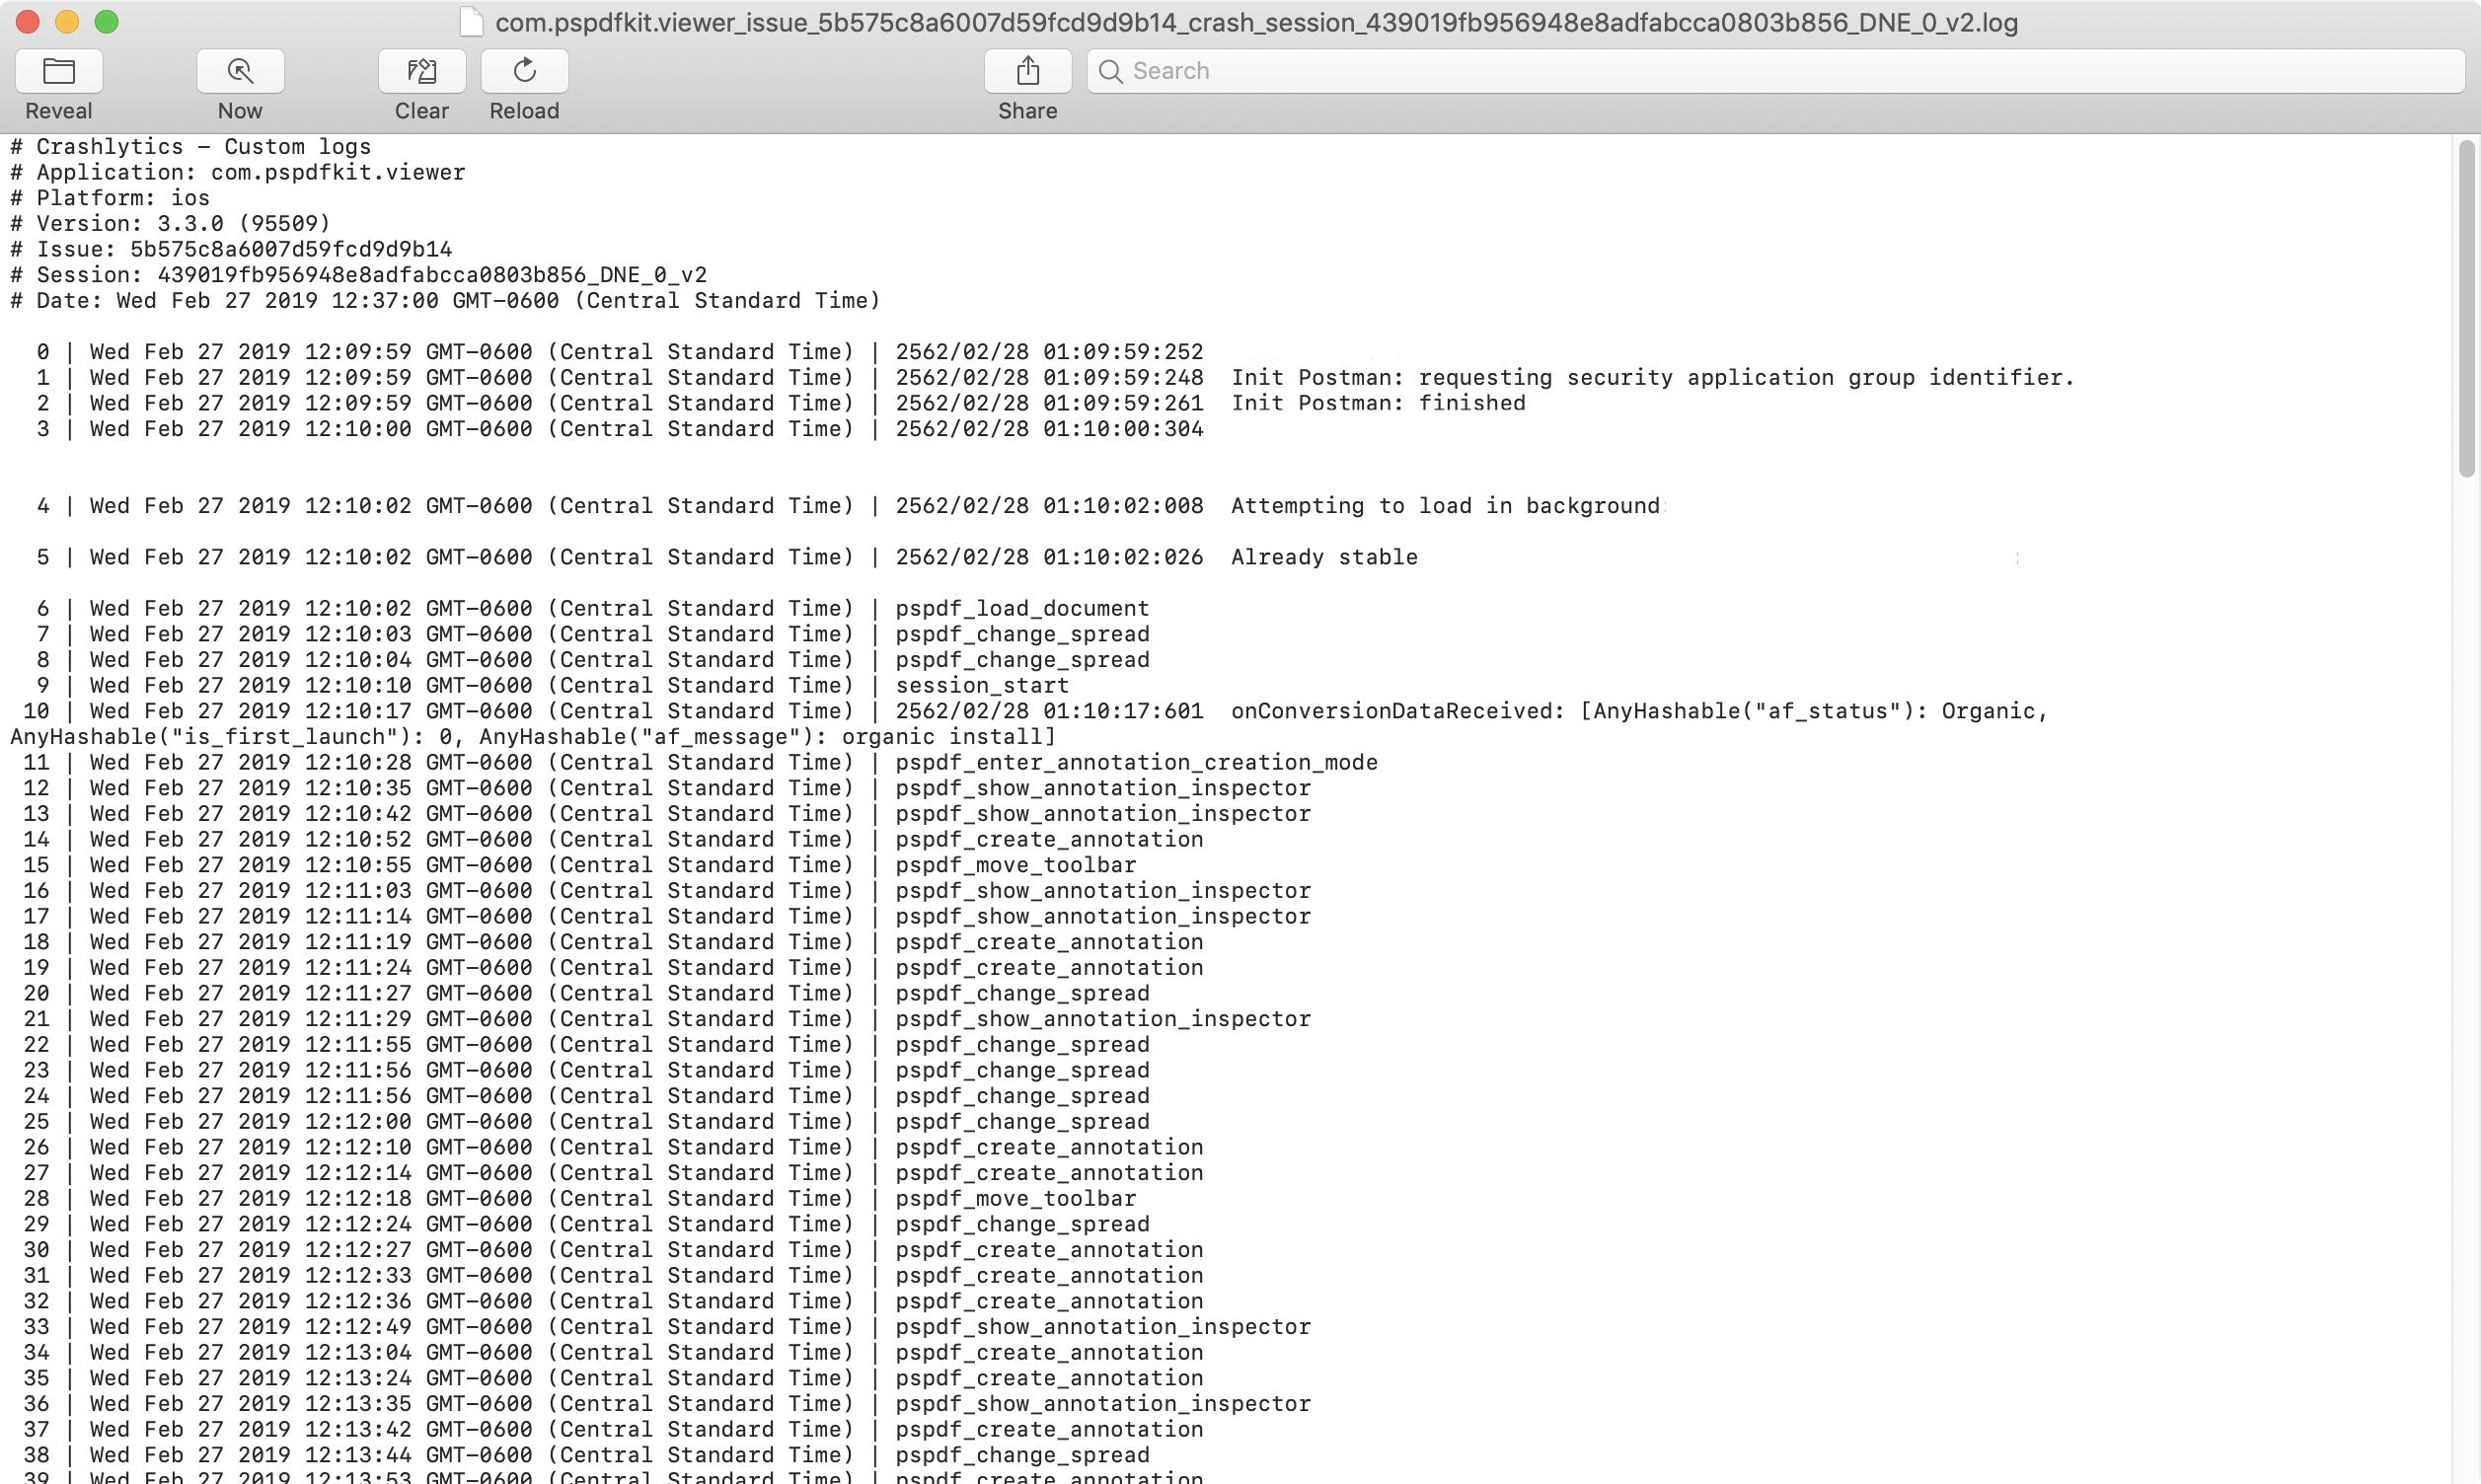 Screenshot of Console.app showing an example of the logs attached to a Crashlytics crash report.